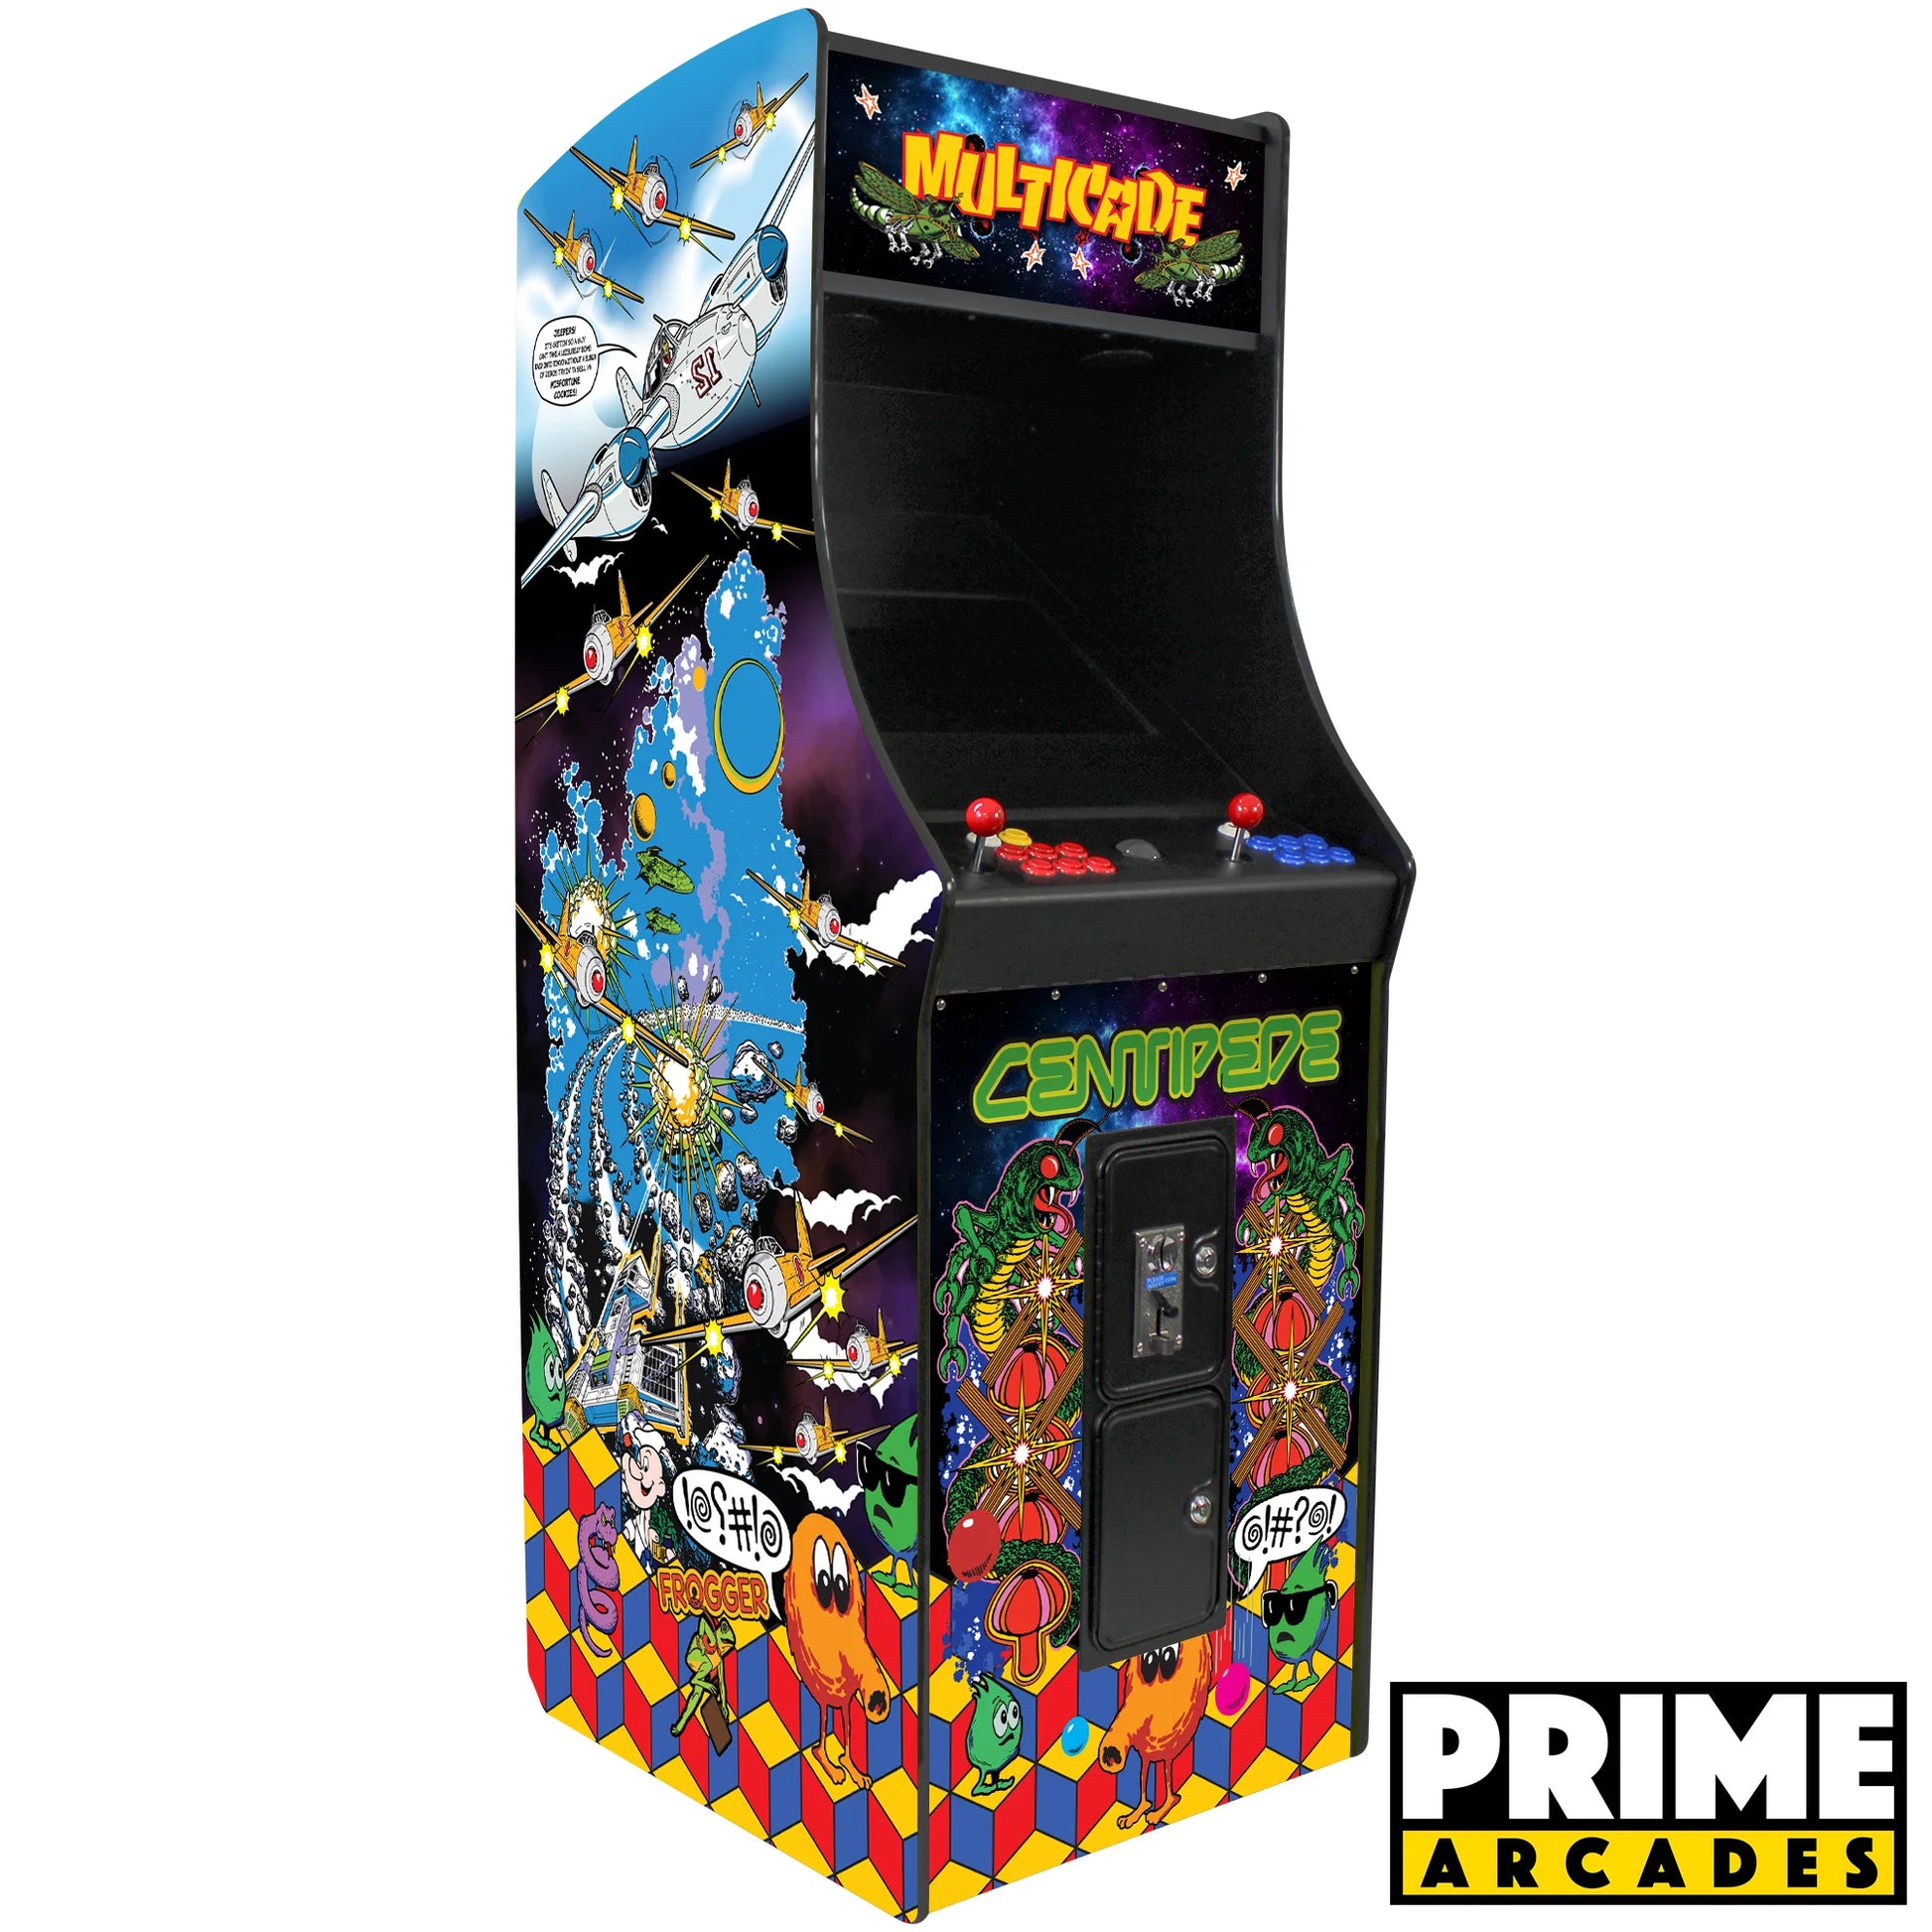 60 Games in 1 Stand up Arcade - Prime Arcades Inc